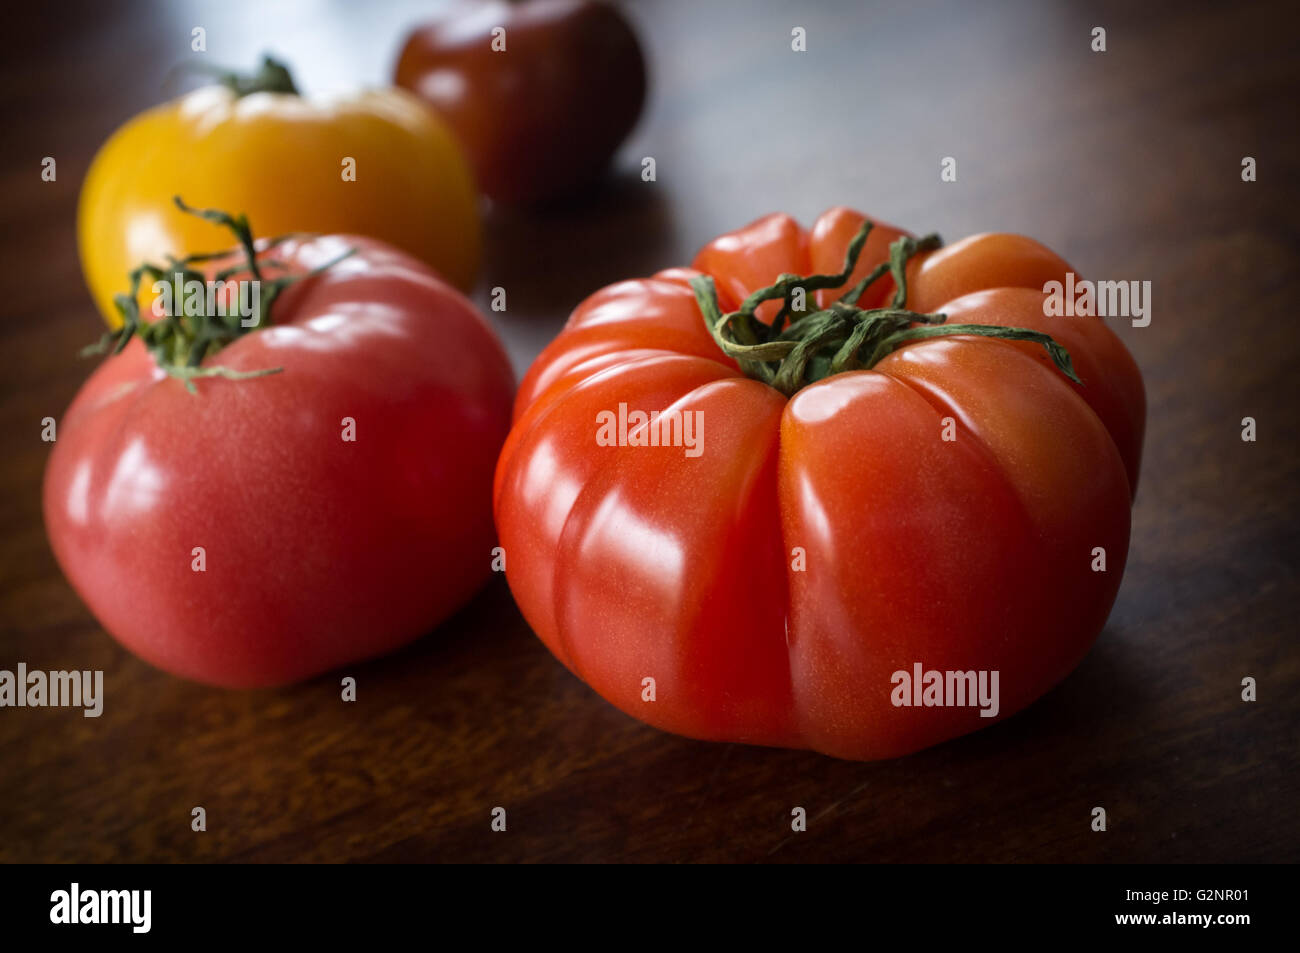 Colorful juicy heirloom or heritage tomatoes on wooden table Stock Photo